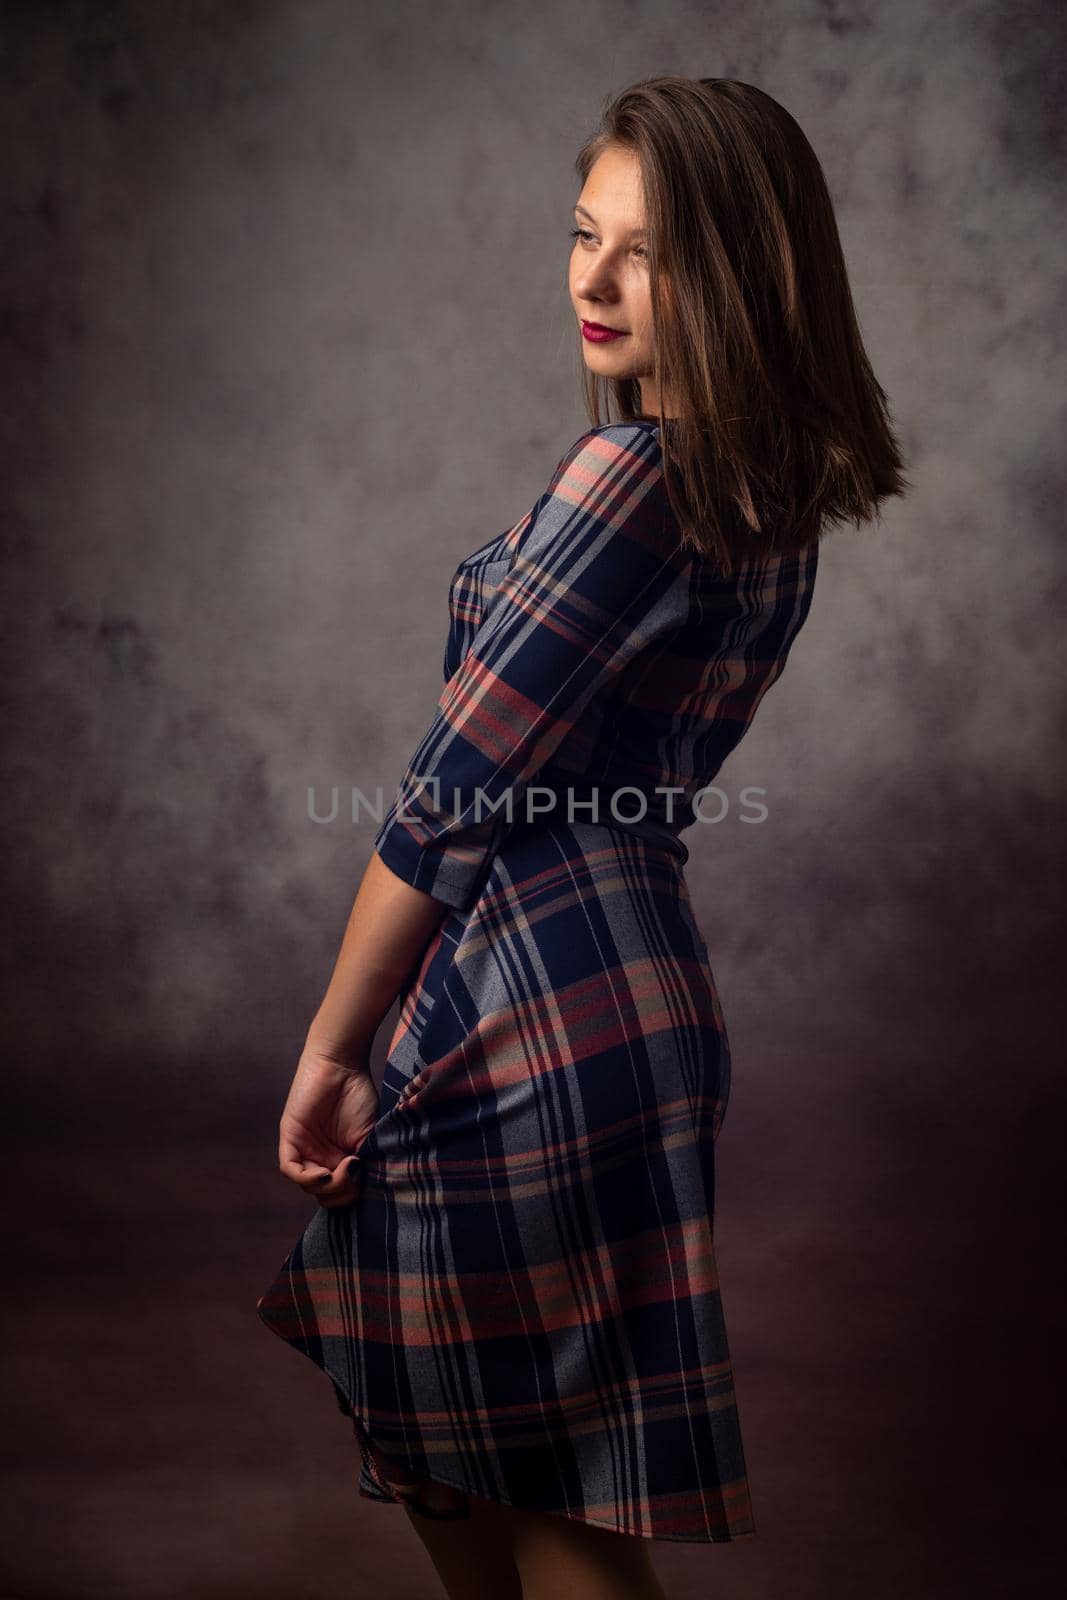 Portrait of a beautiful girl in a checkered dress, the girl is turned sideways